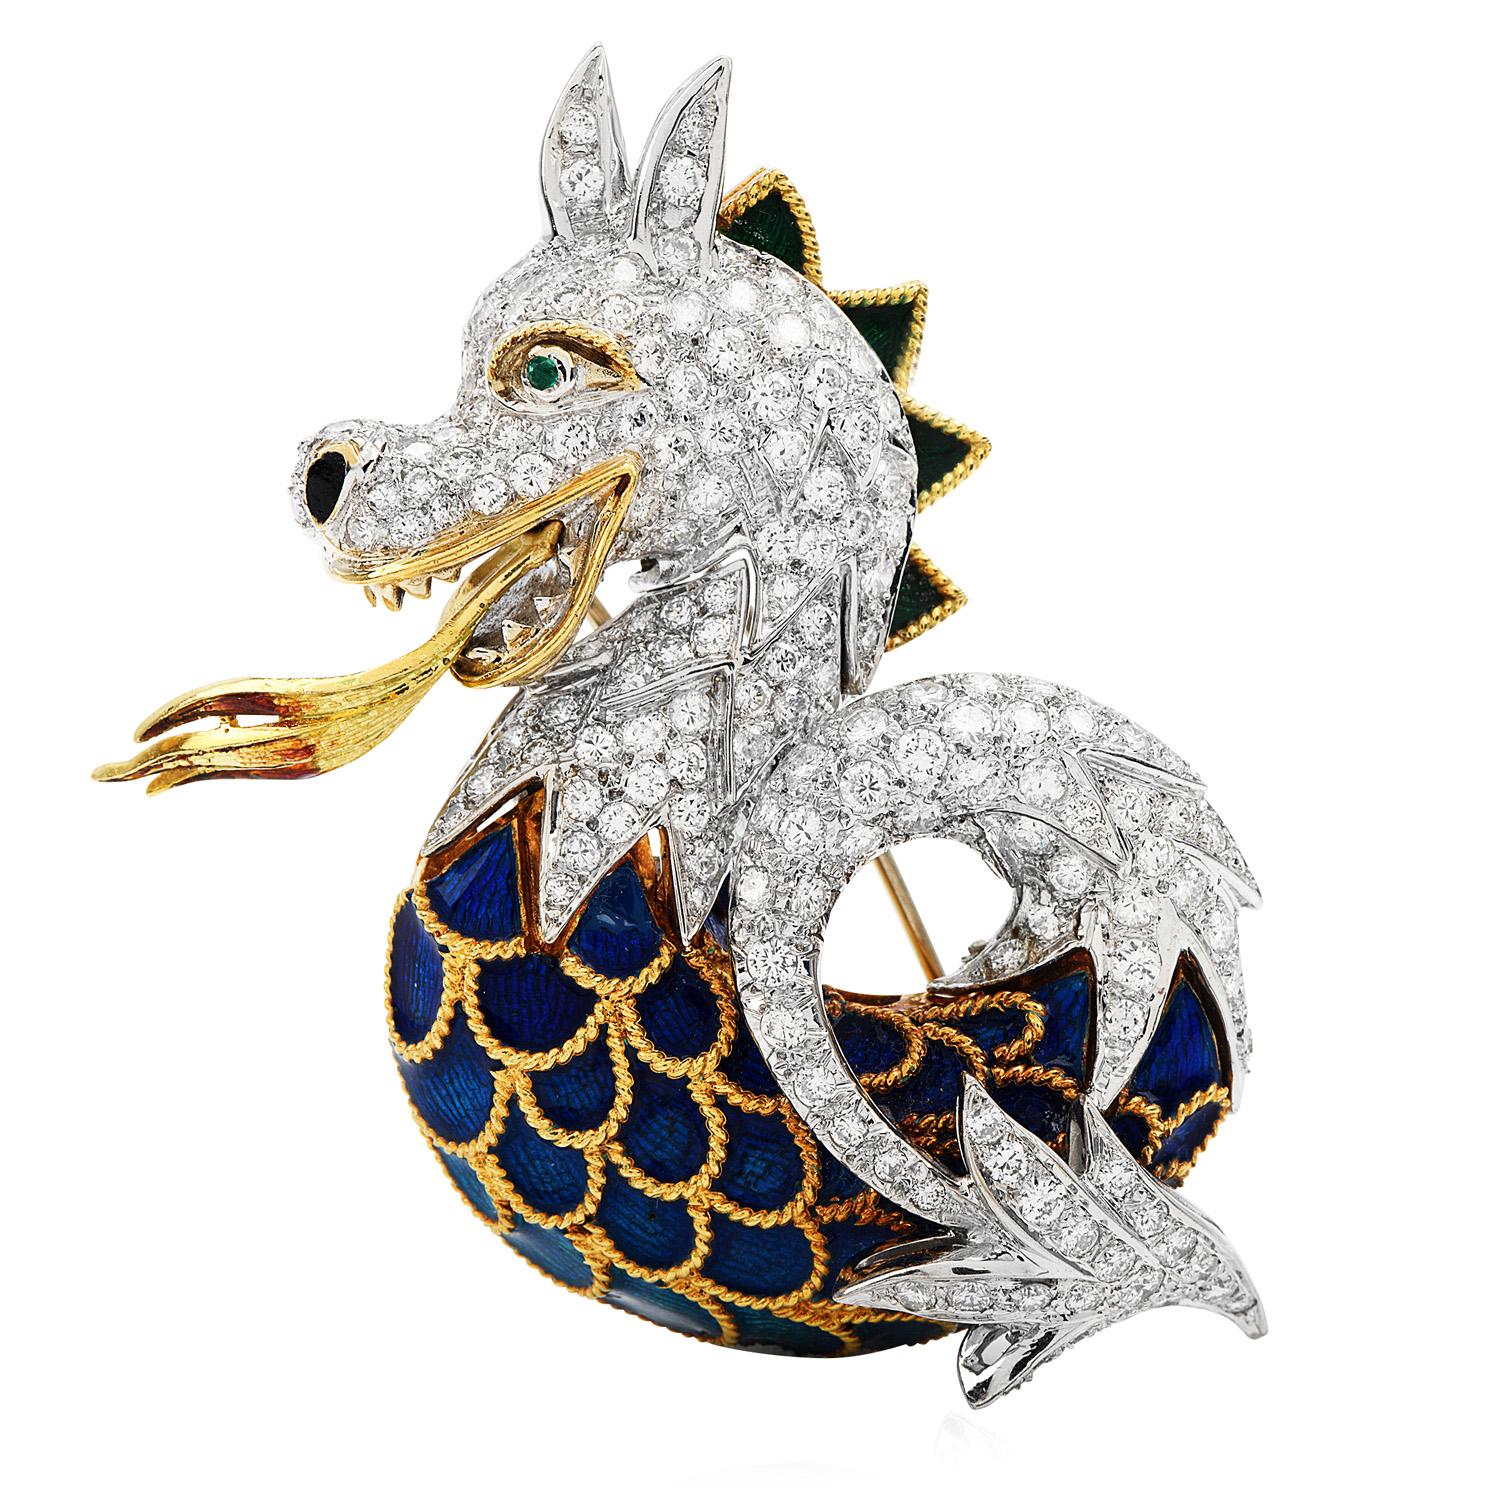 Bring a dash of color to your wardrobe with this unique Vintage Diamond Enamel 18K Gold Unique Dragon Pin Brooch

weighing approximately 43.6 grams.
Expertly Handcrafted in solid heavy 18K yellow and white, this exquisite
piece is adorned by an